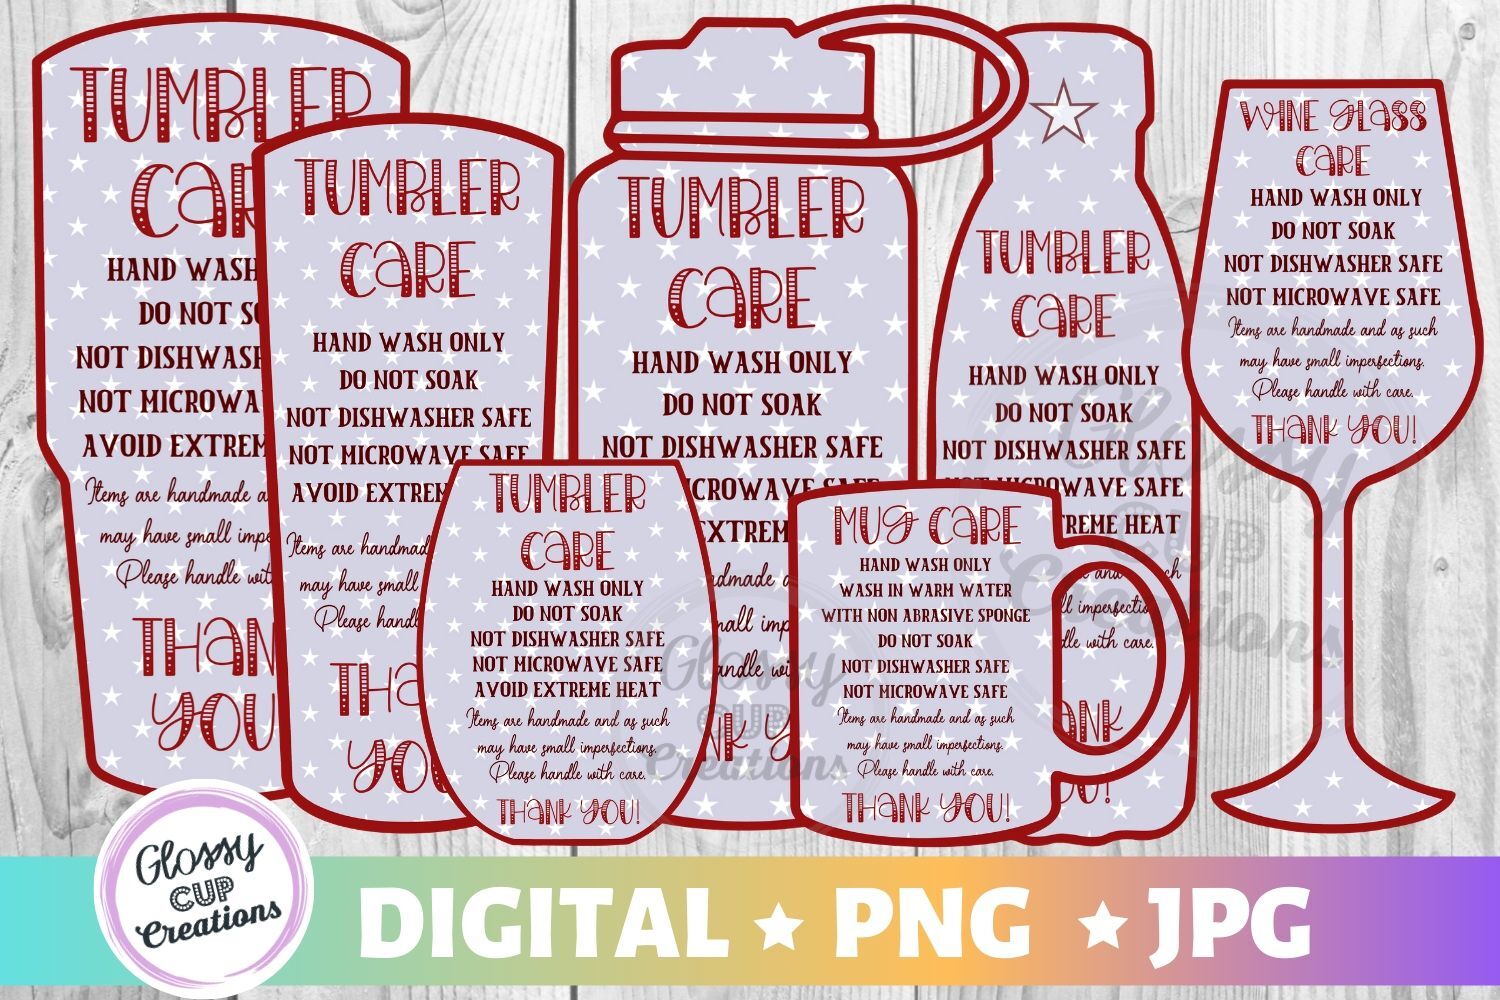 Tumbler Care Cards Stars Edition Png Jpg By Glossy Cup Creations Thehungryjpeg Com